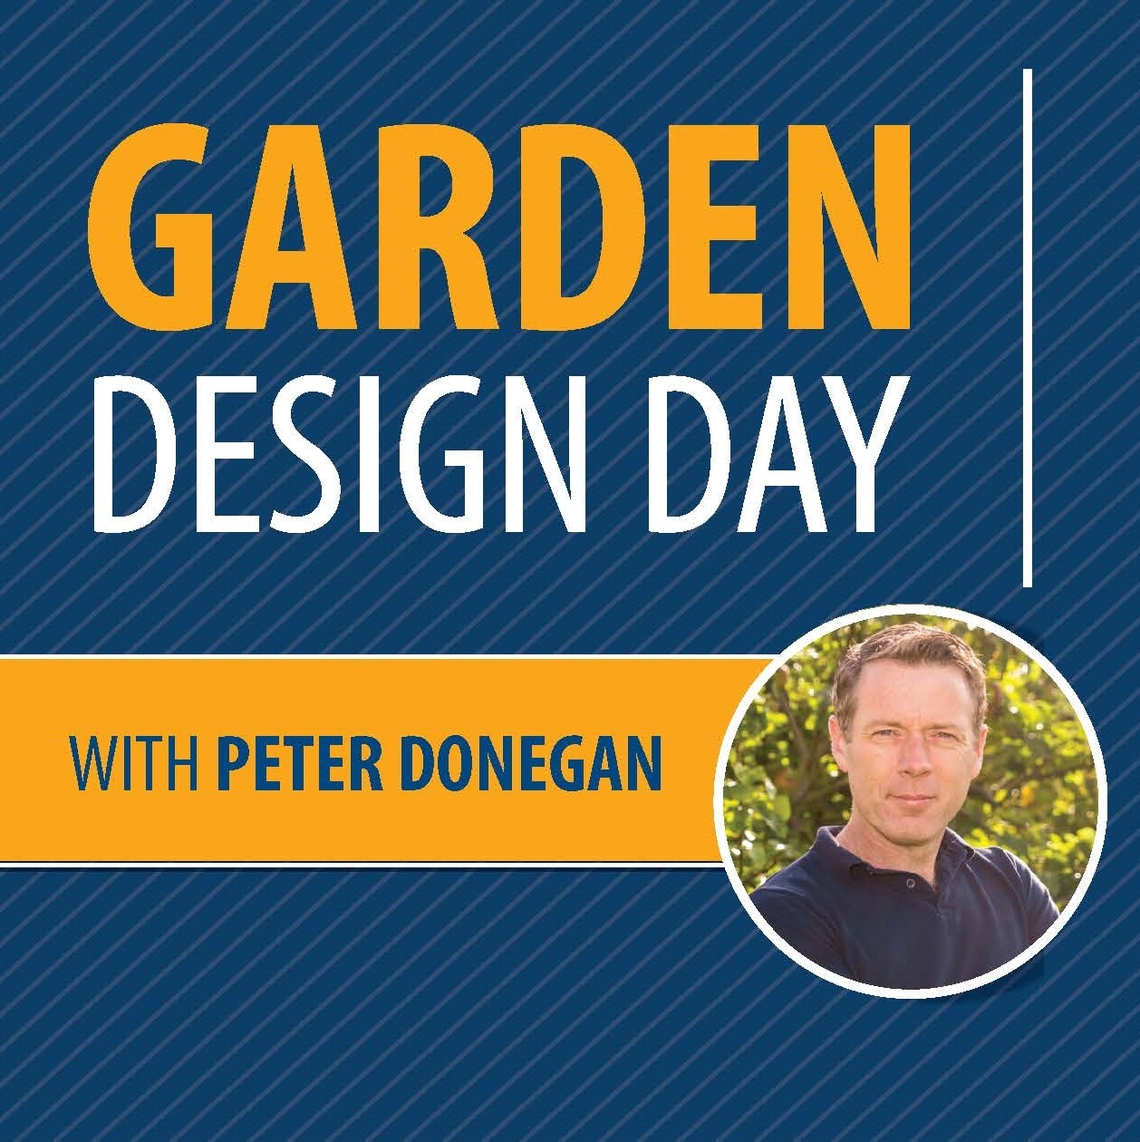 image of design day image